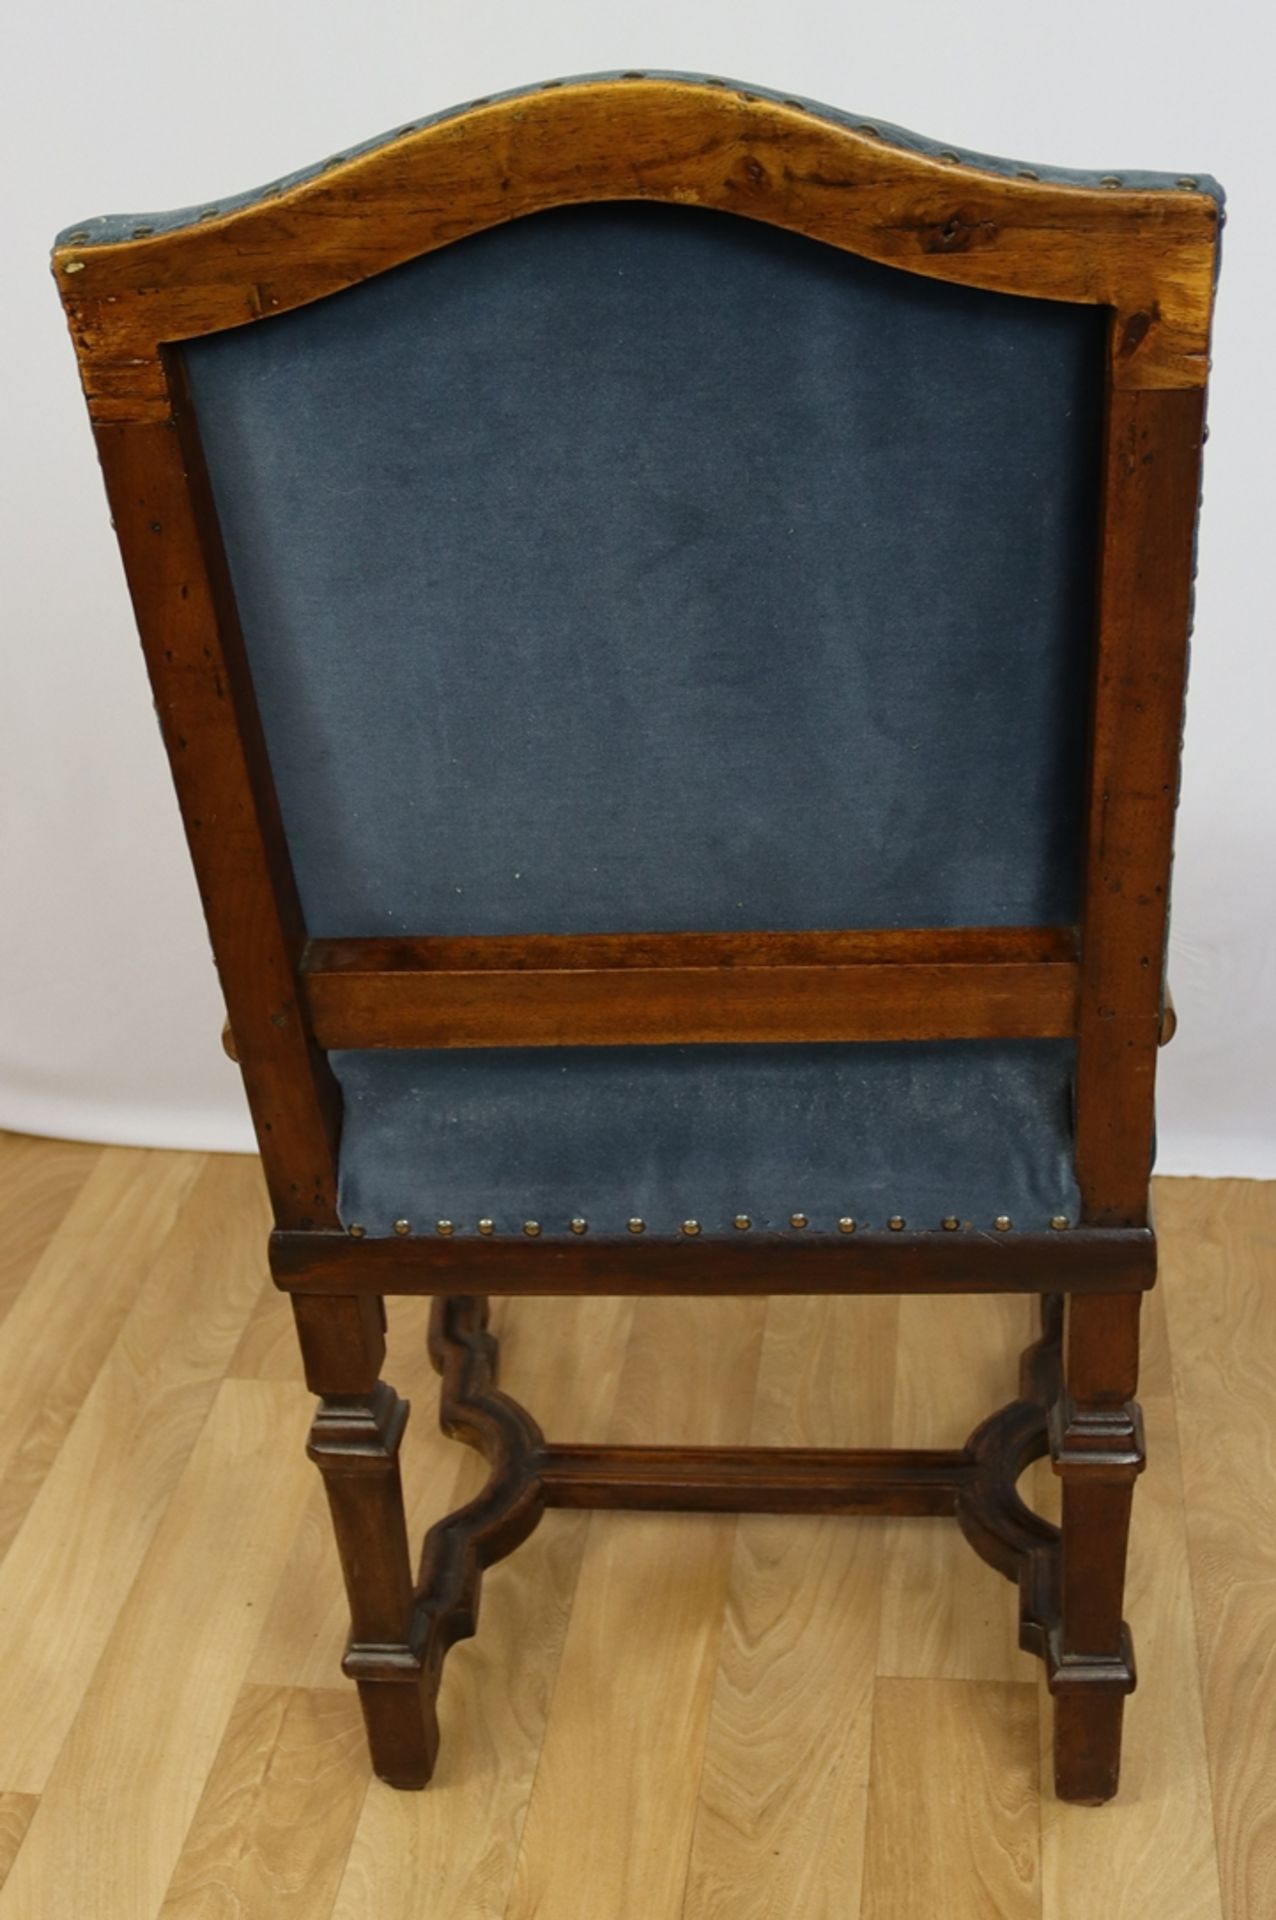 Baroque chair, Middle German c. 1780 - 1800 - Image 3 of 3